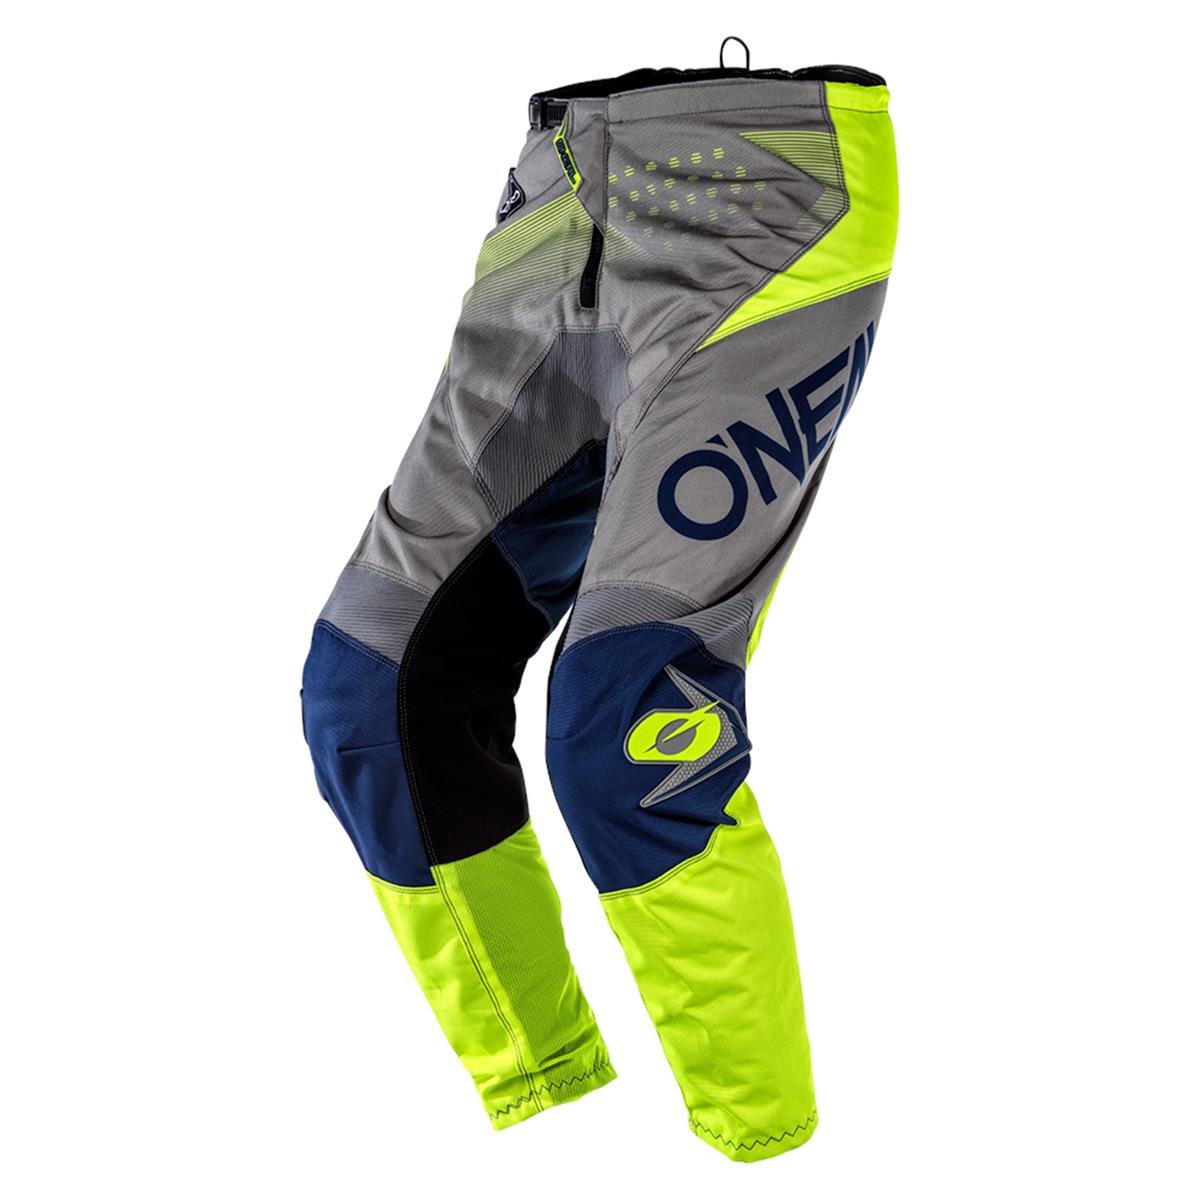 O'Neal MX Pants Element Factor - Gray/Blue/Neon Yellow